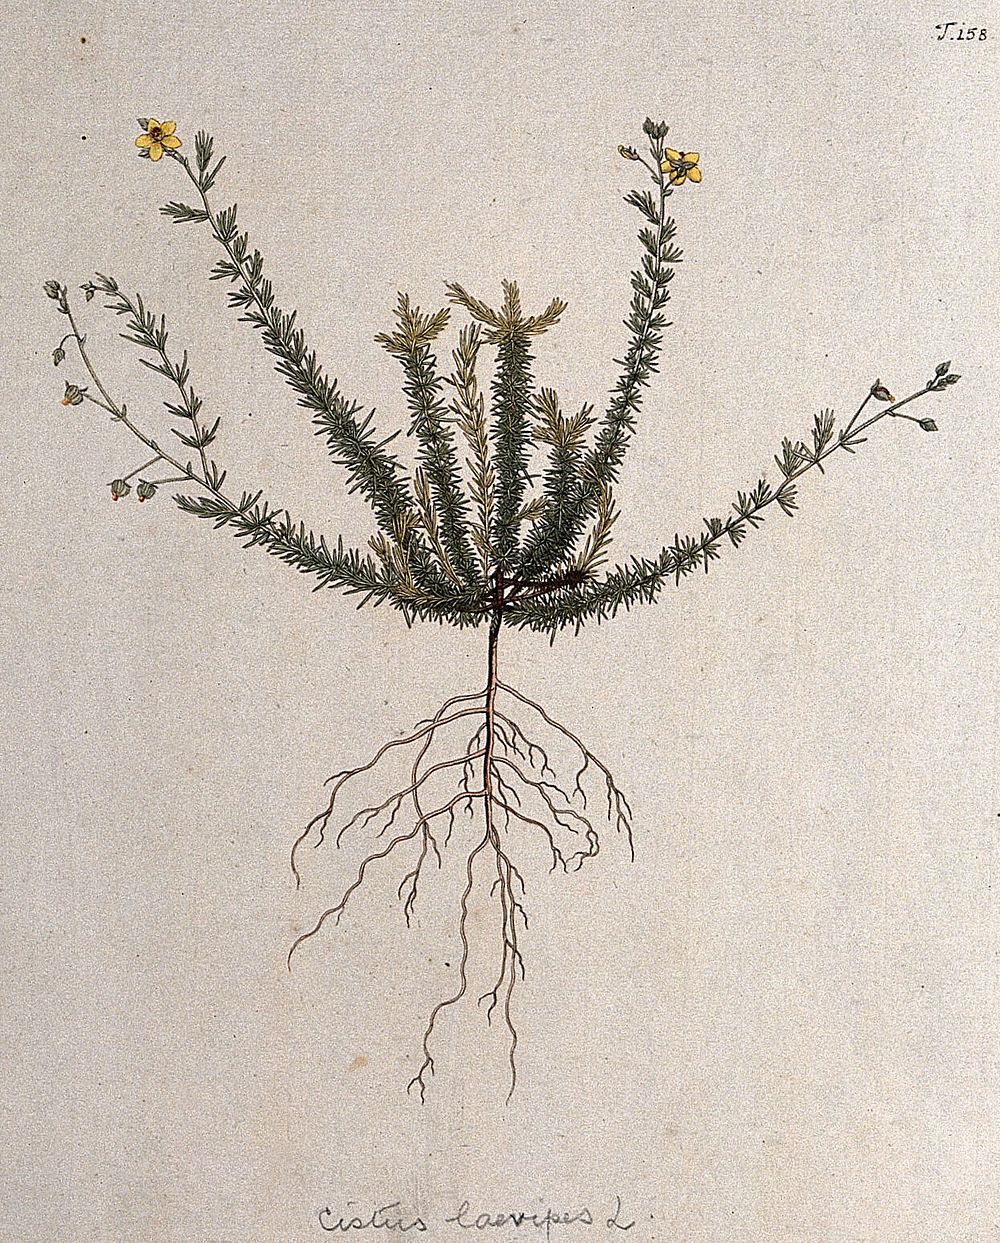 Rockrose (Helianthemum laevipes): entire flowering and fruiting plant. Coloured engraving after F. von Scheidl, 1772.